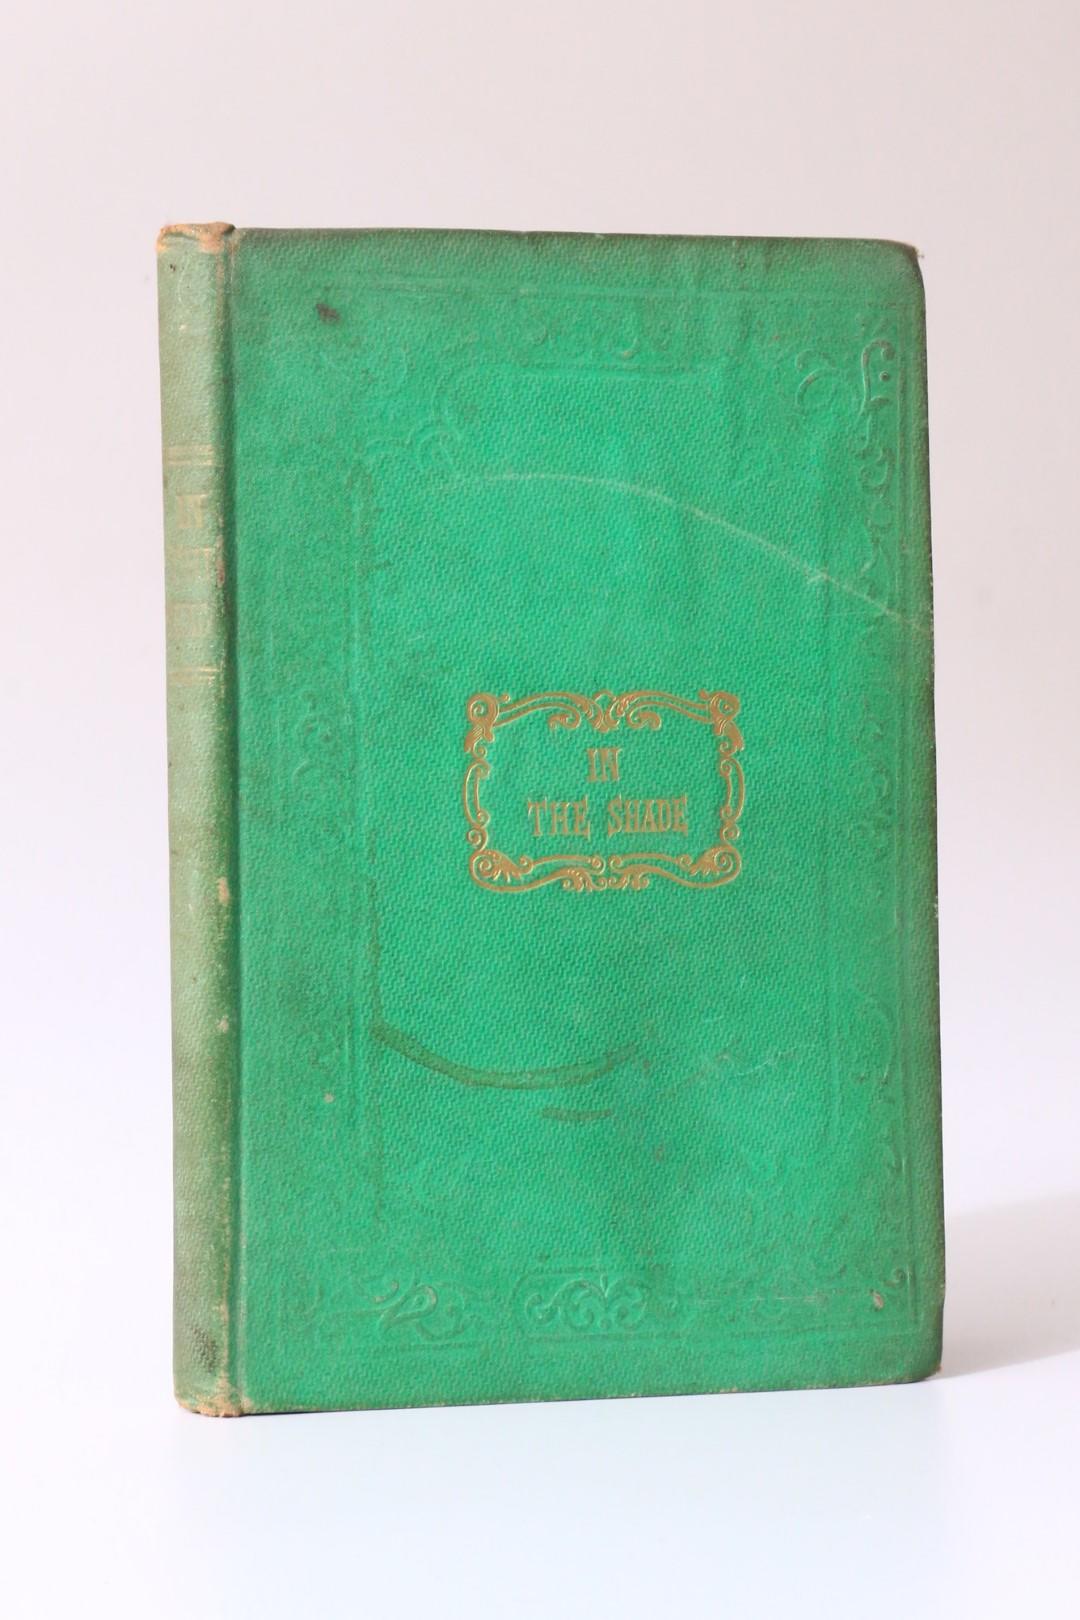 Oscura - In the Shade - J. Acworth, 1861, First Edition.